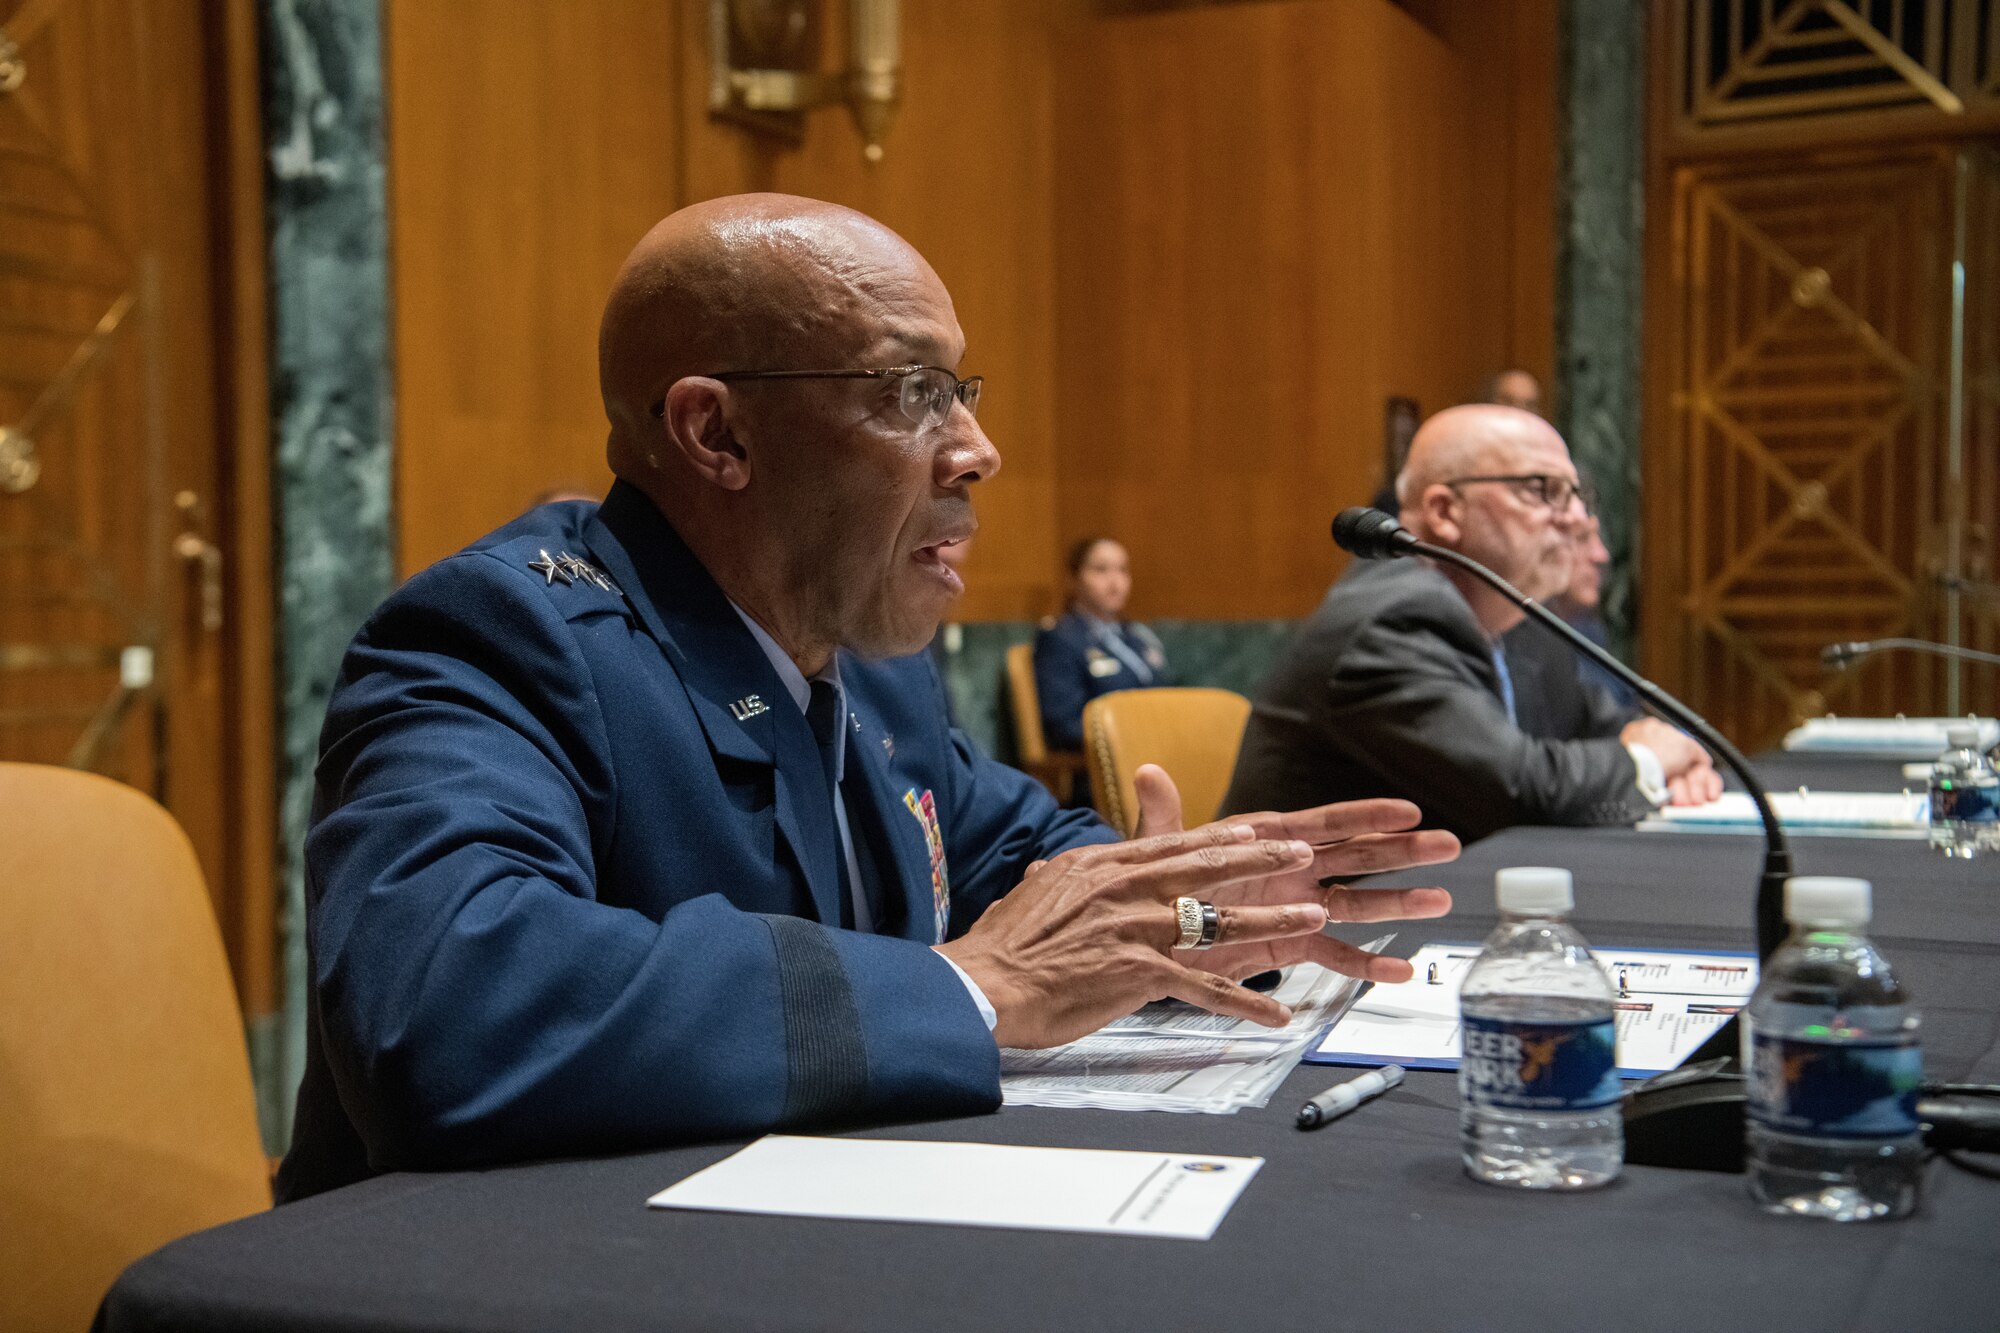 Air Force Chief of Staff Gen. CQ Brown, Jr. addresses the Senate Appropriations Defense Subcommittee, June 8, 2021.